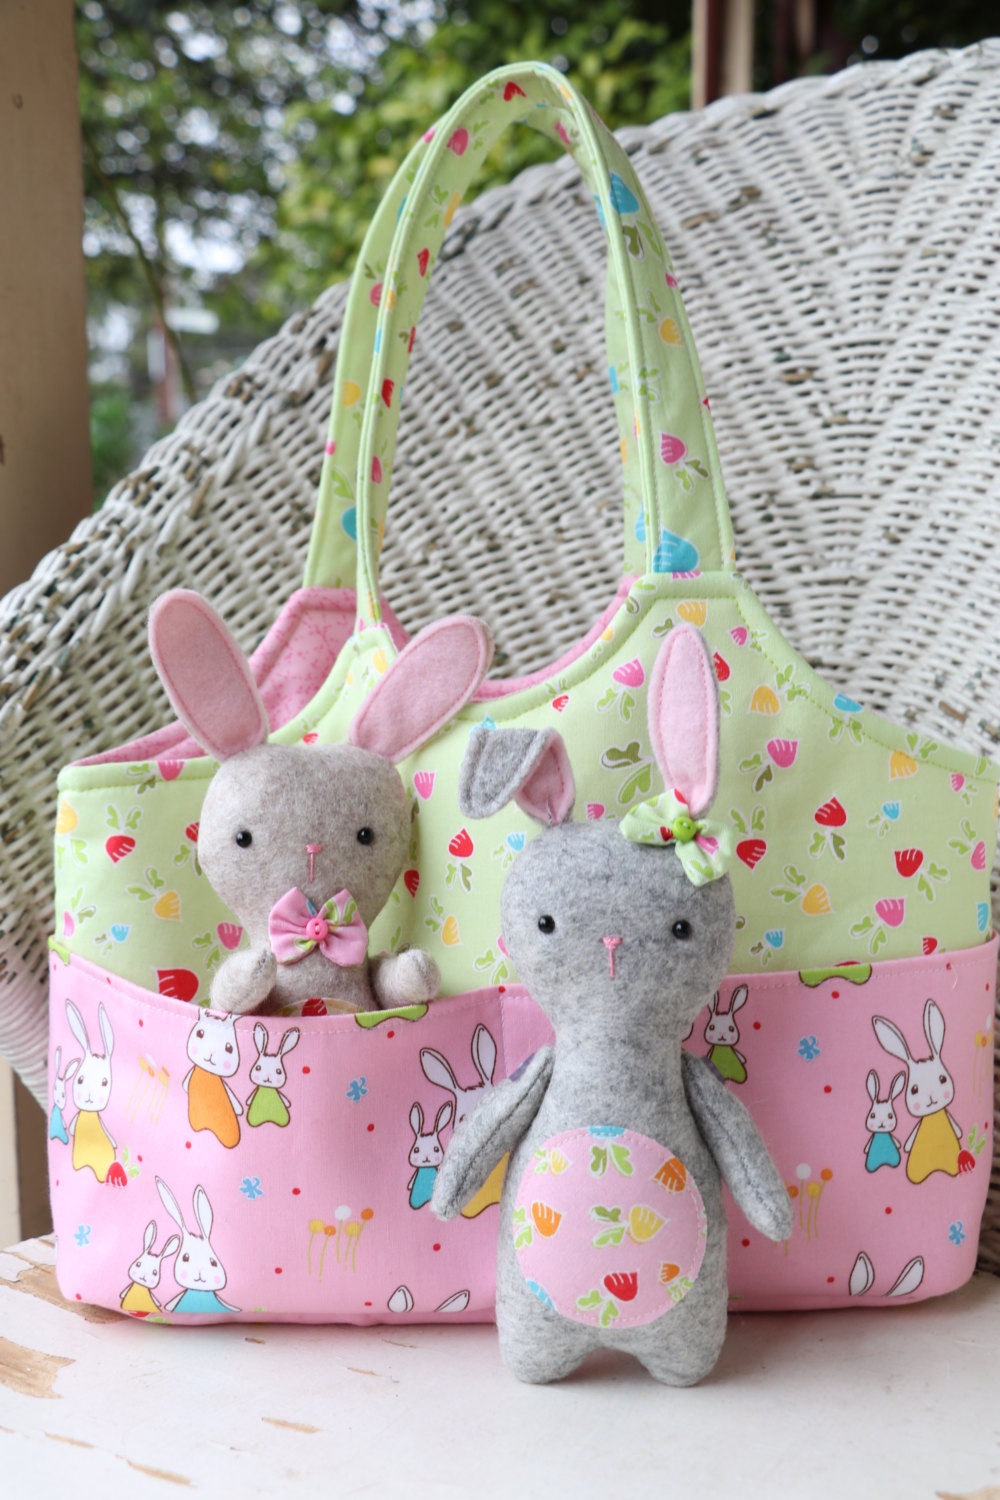 A small easter bag with front pockets holding two felt bunny toys